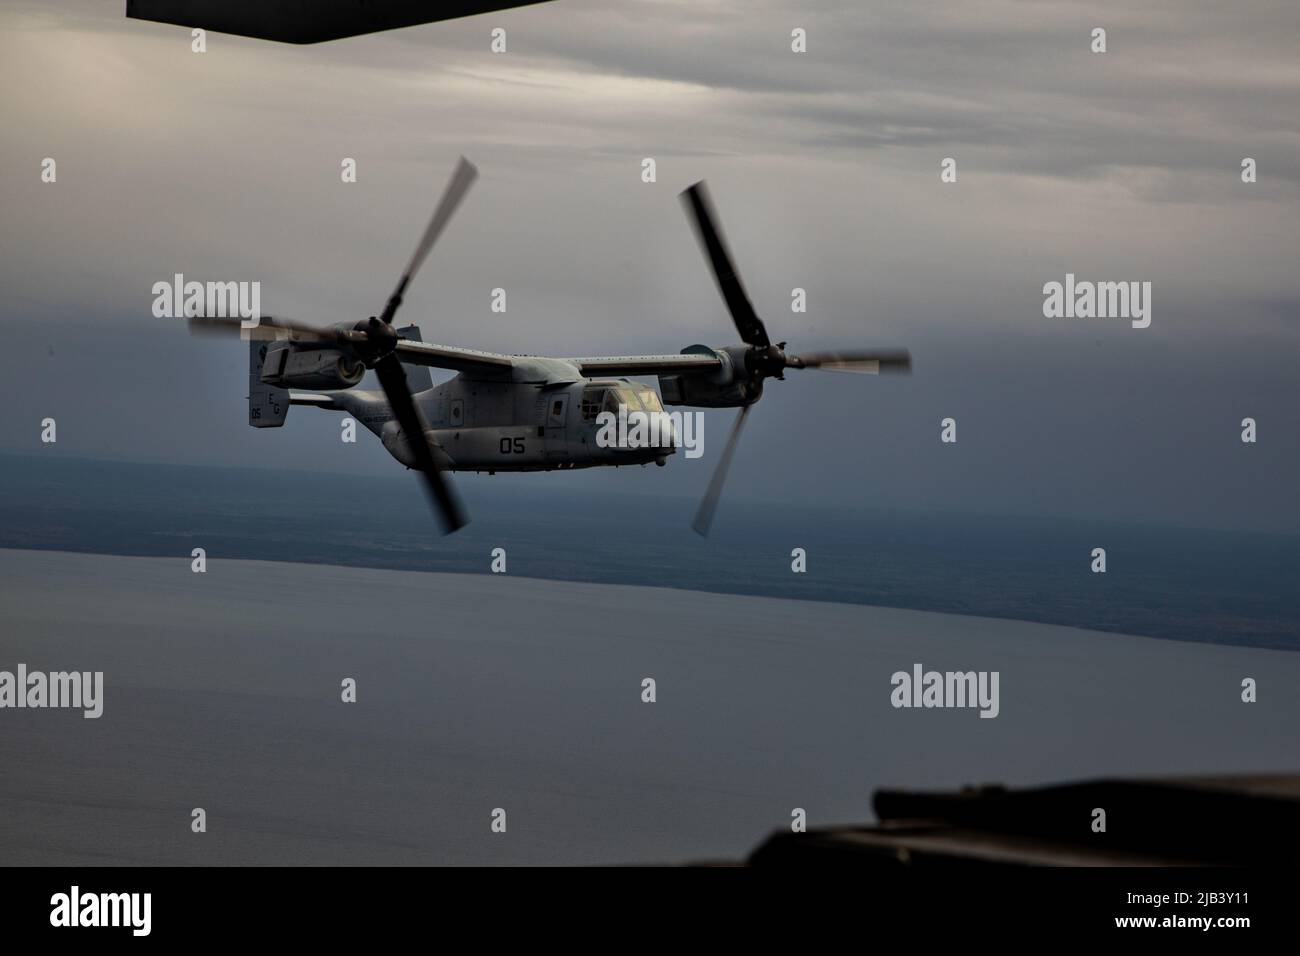 A U.S. Marine Corps MV-22 Osprey, assigned to the Aviation Combat Element, 22nd Marine Expeditionary Unit, travels from Parnu Airfield, Parnu, Estonia, back to Wasp-class amphibious assault ship USS Kearsarge (LHD 3), during ship-to-shore movements, May 21, 2022. The 22nd MEU is participating in the Estonian-led exercise Siil 22 (Hedgehog 22 in English). Hedgehog 22 brings together members of the Estonian Defense Force and Sailors and Marines under Commander Task Force 61/2 to enhance allied interoperability and preserve security and stability in the Baltic region. (U.S. Marine Corps photo by Stock Photo